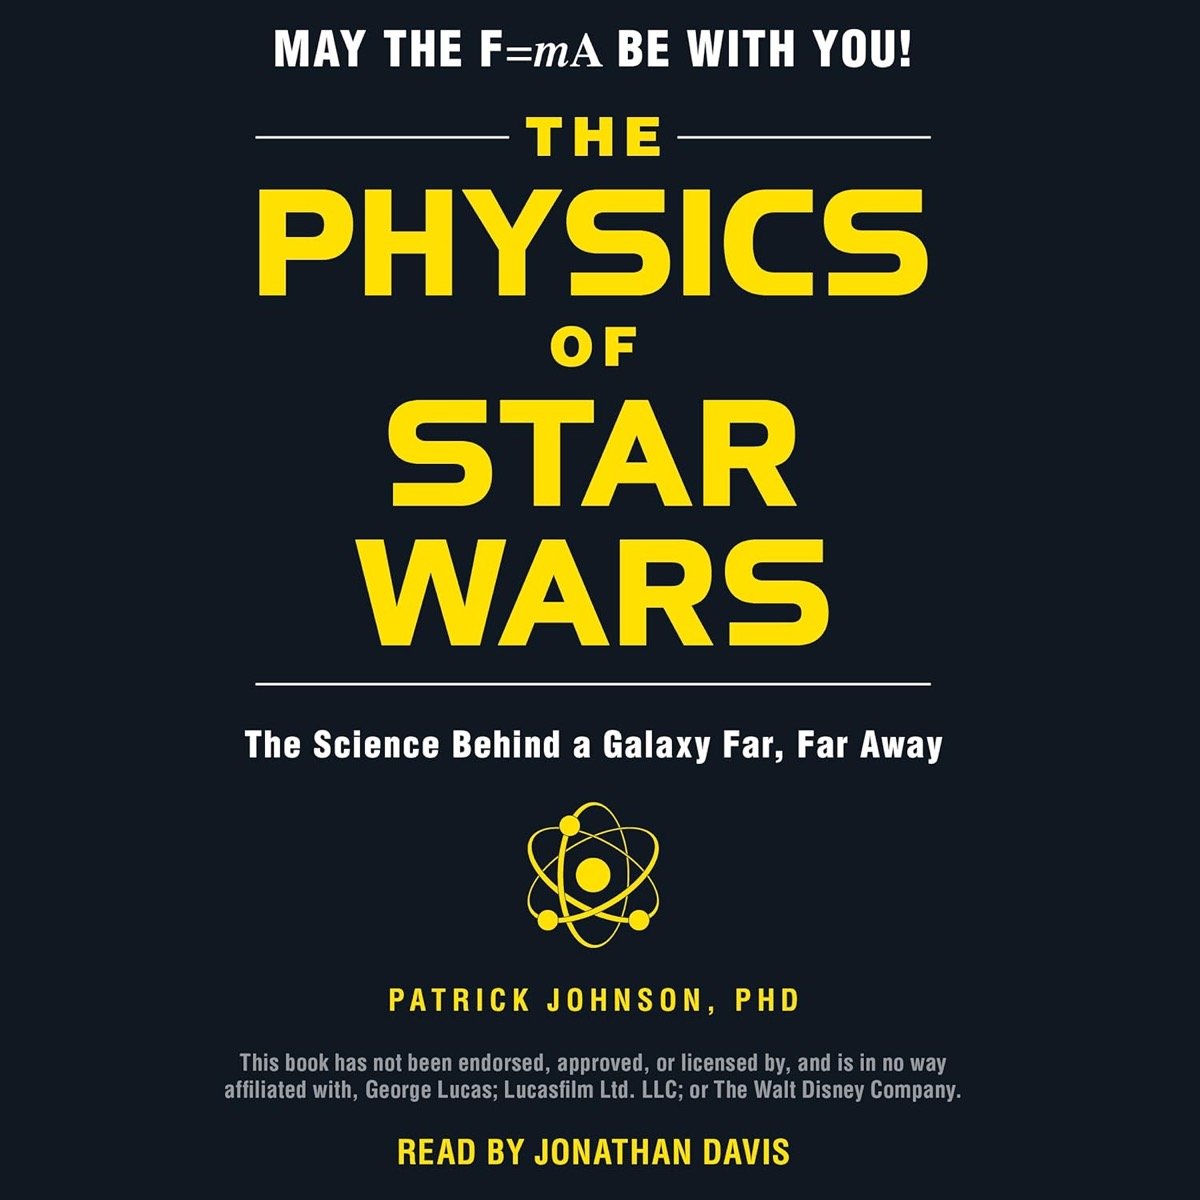 Cover art for The Physics of Star Wars: The Science Behind a Galaxy Far, Far Away showing the title text 